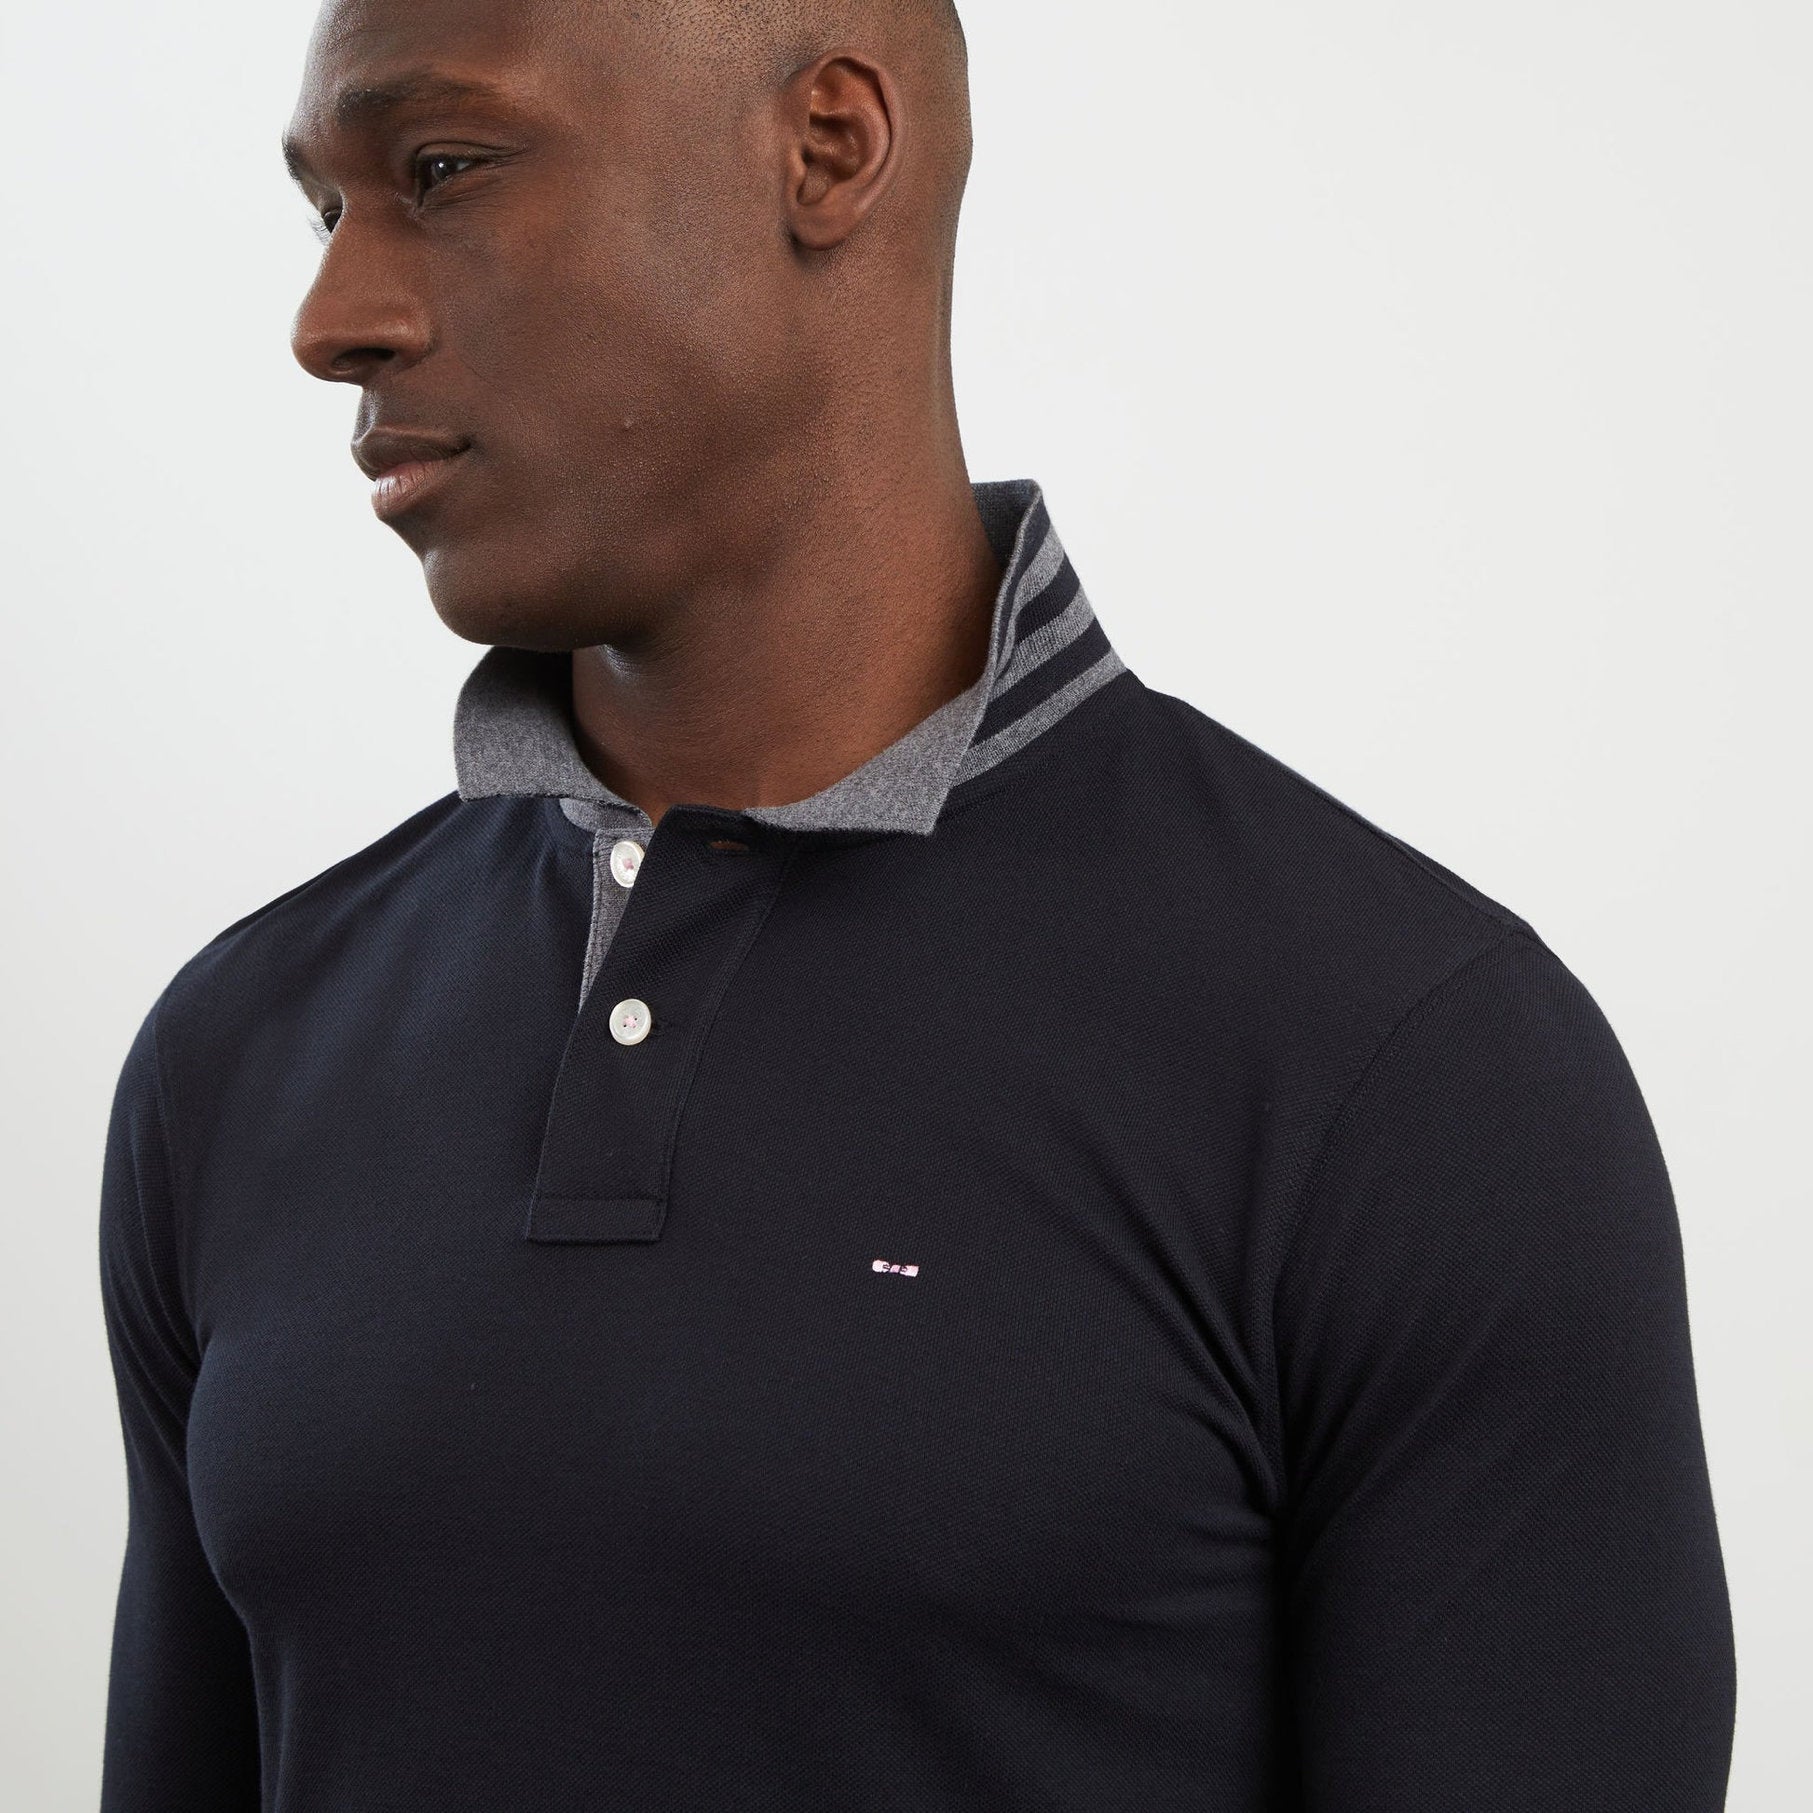 Black Cotton Polo With Contrasting Neck_PPKNIPLE0006_NO_06